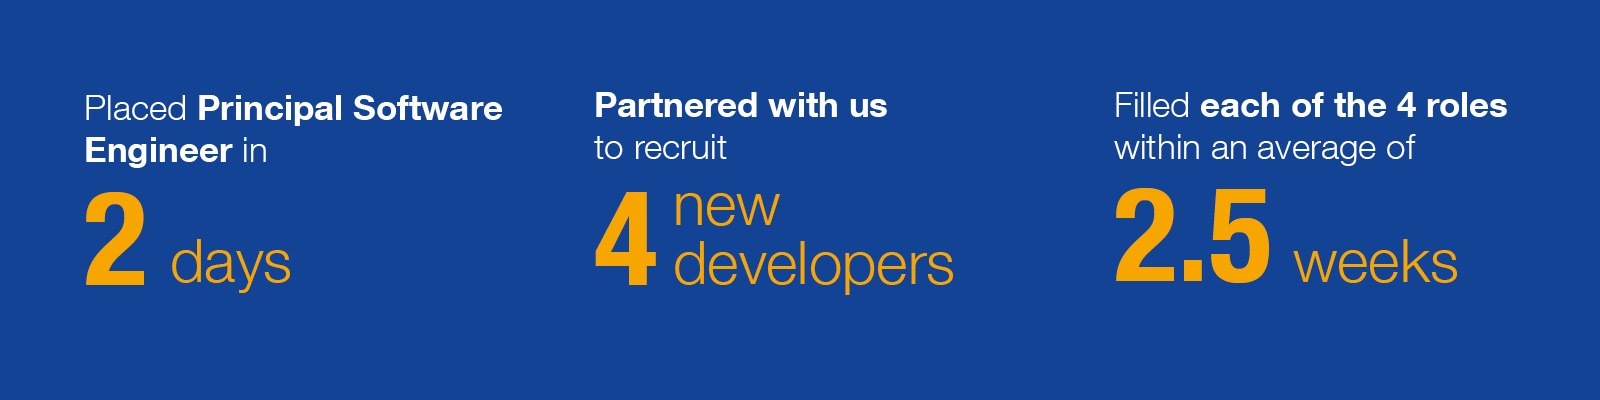 We placed in 2 days principal software engineer roles which took an average of 2.5 weeks to fill each of the 4 roles and had 4 new developers that partnered with us to recruit.